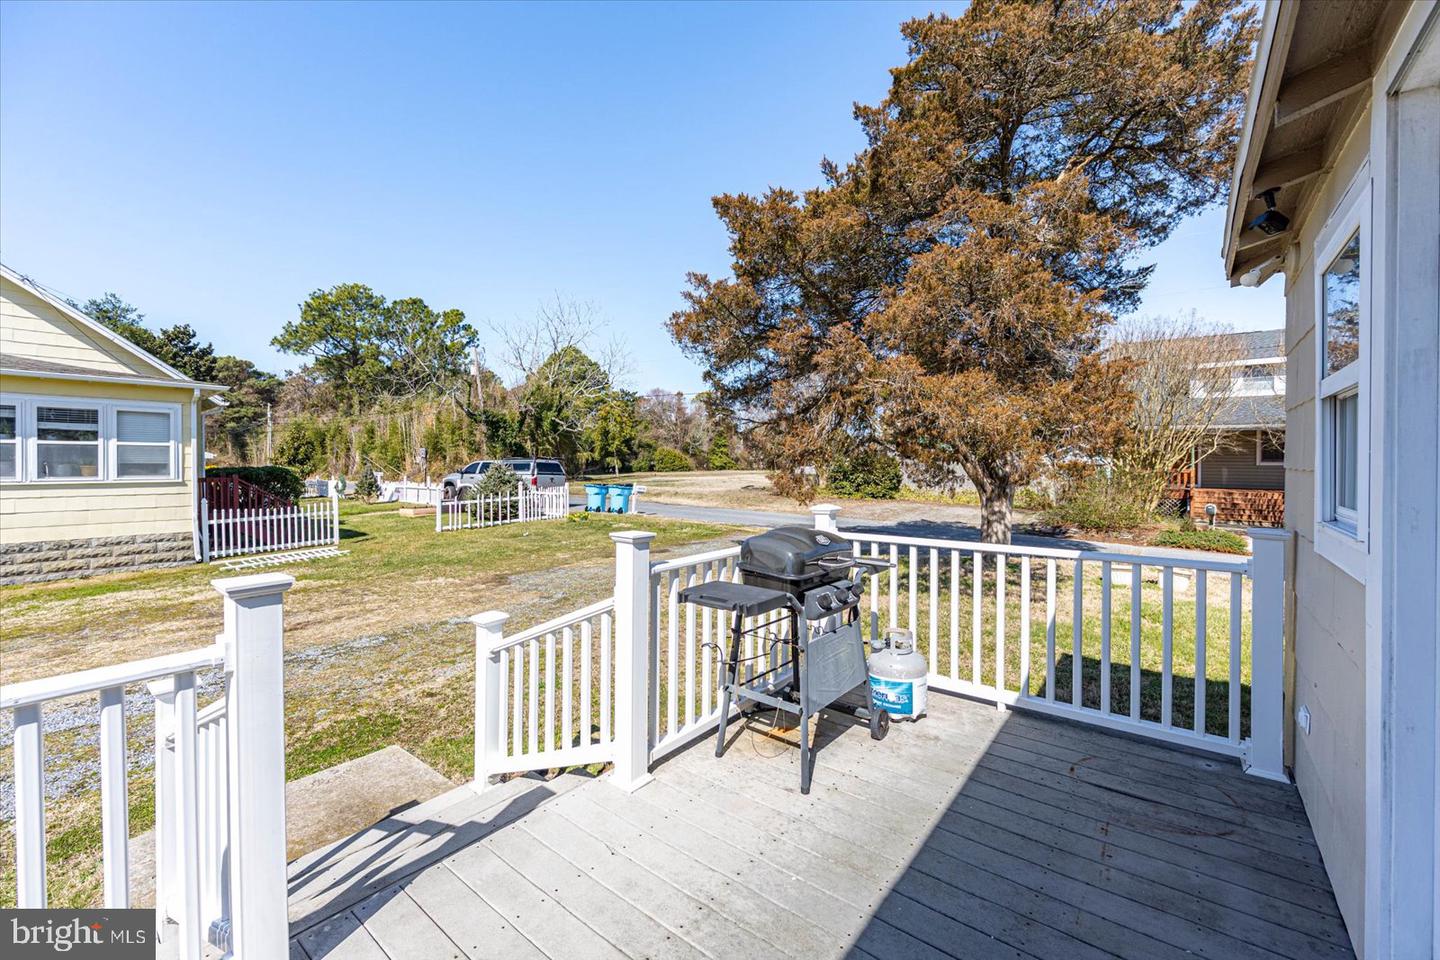 MDWO2019446-802902744720-2024-03-07-00-08-06 9801 / 9805 Golf Course Rd | Ocean City, MD Real Estate For Sale | MLS# Mdwo2019446  - 1st Choice Properties